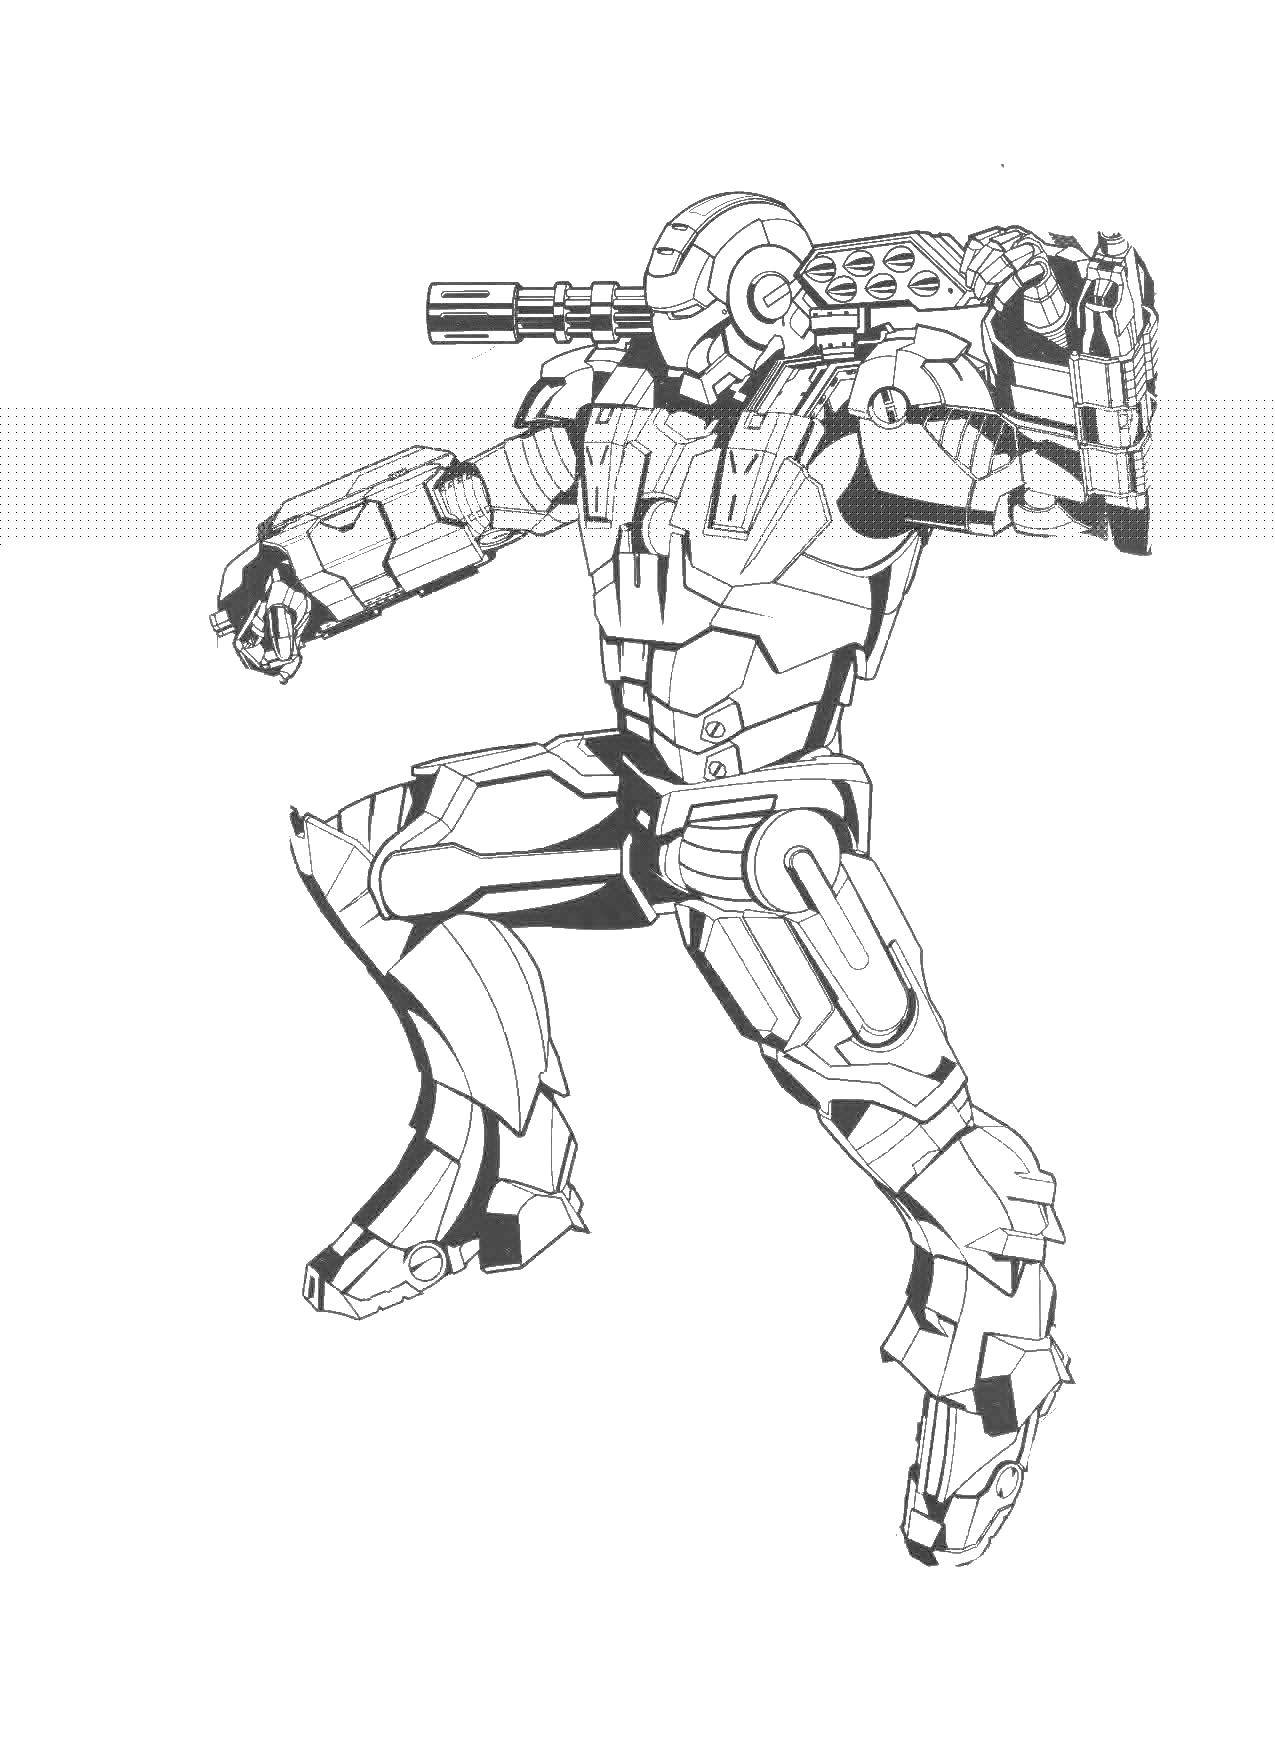 Coloring Iron man is armed. Category iron man. Tags:  weapons, iron man.